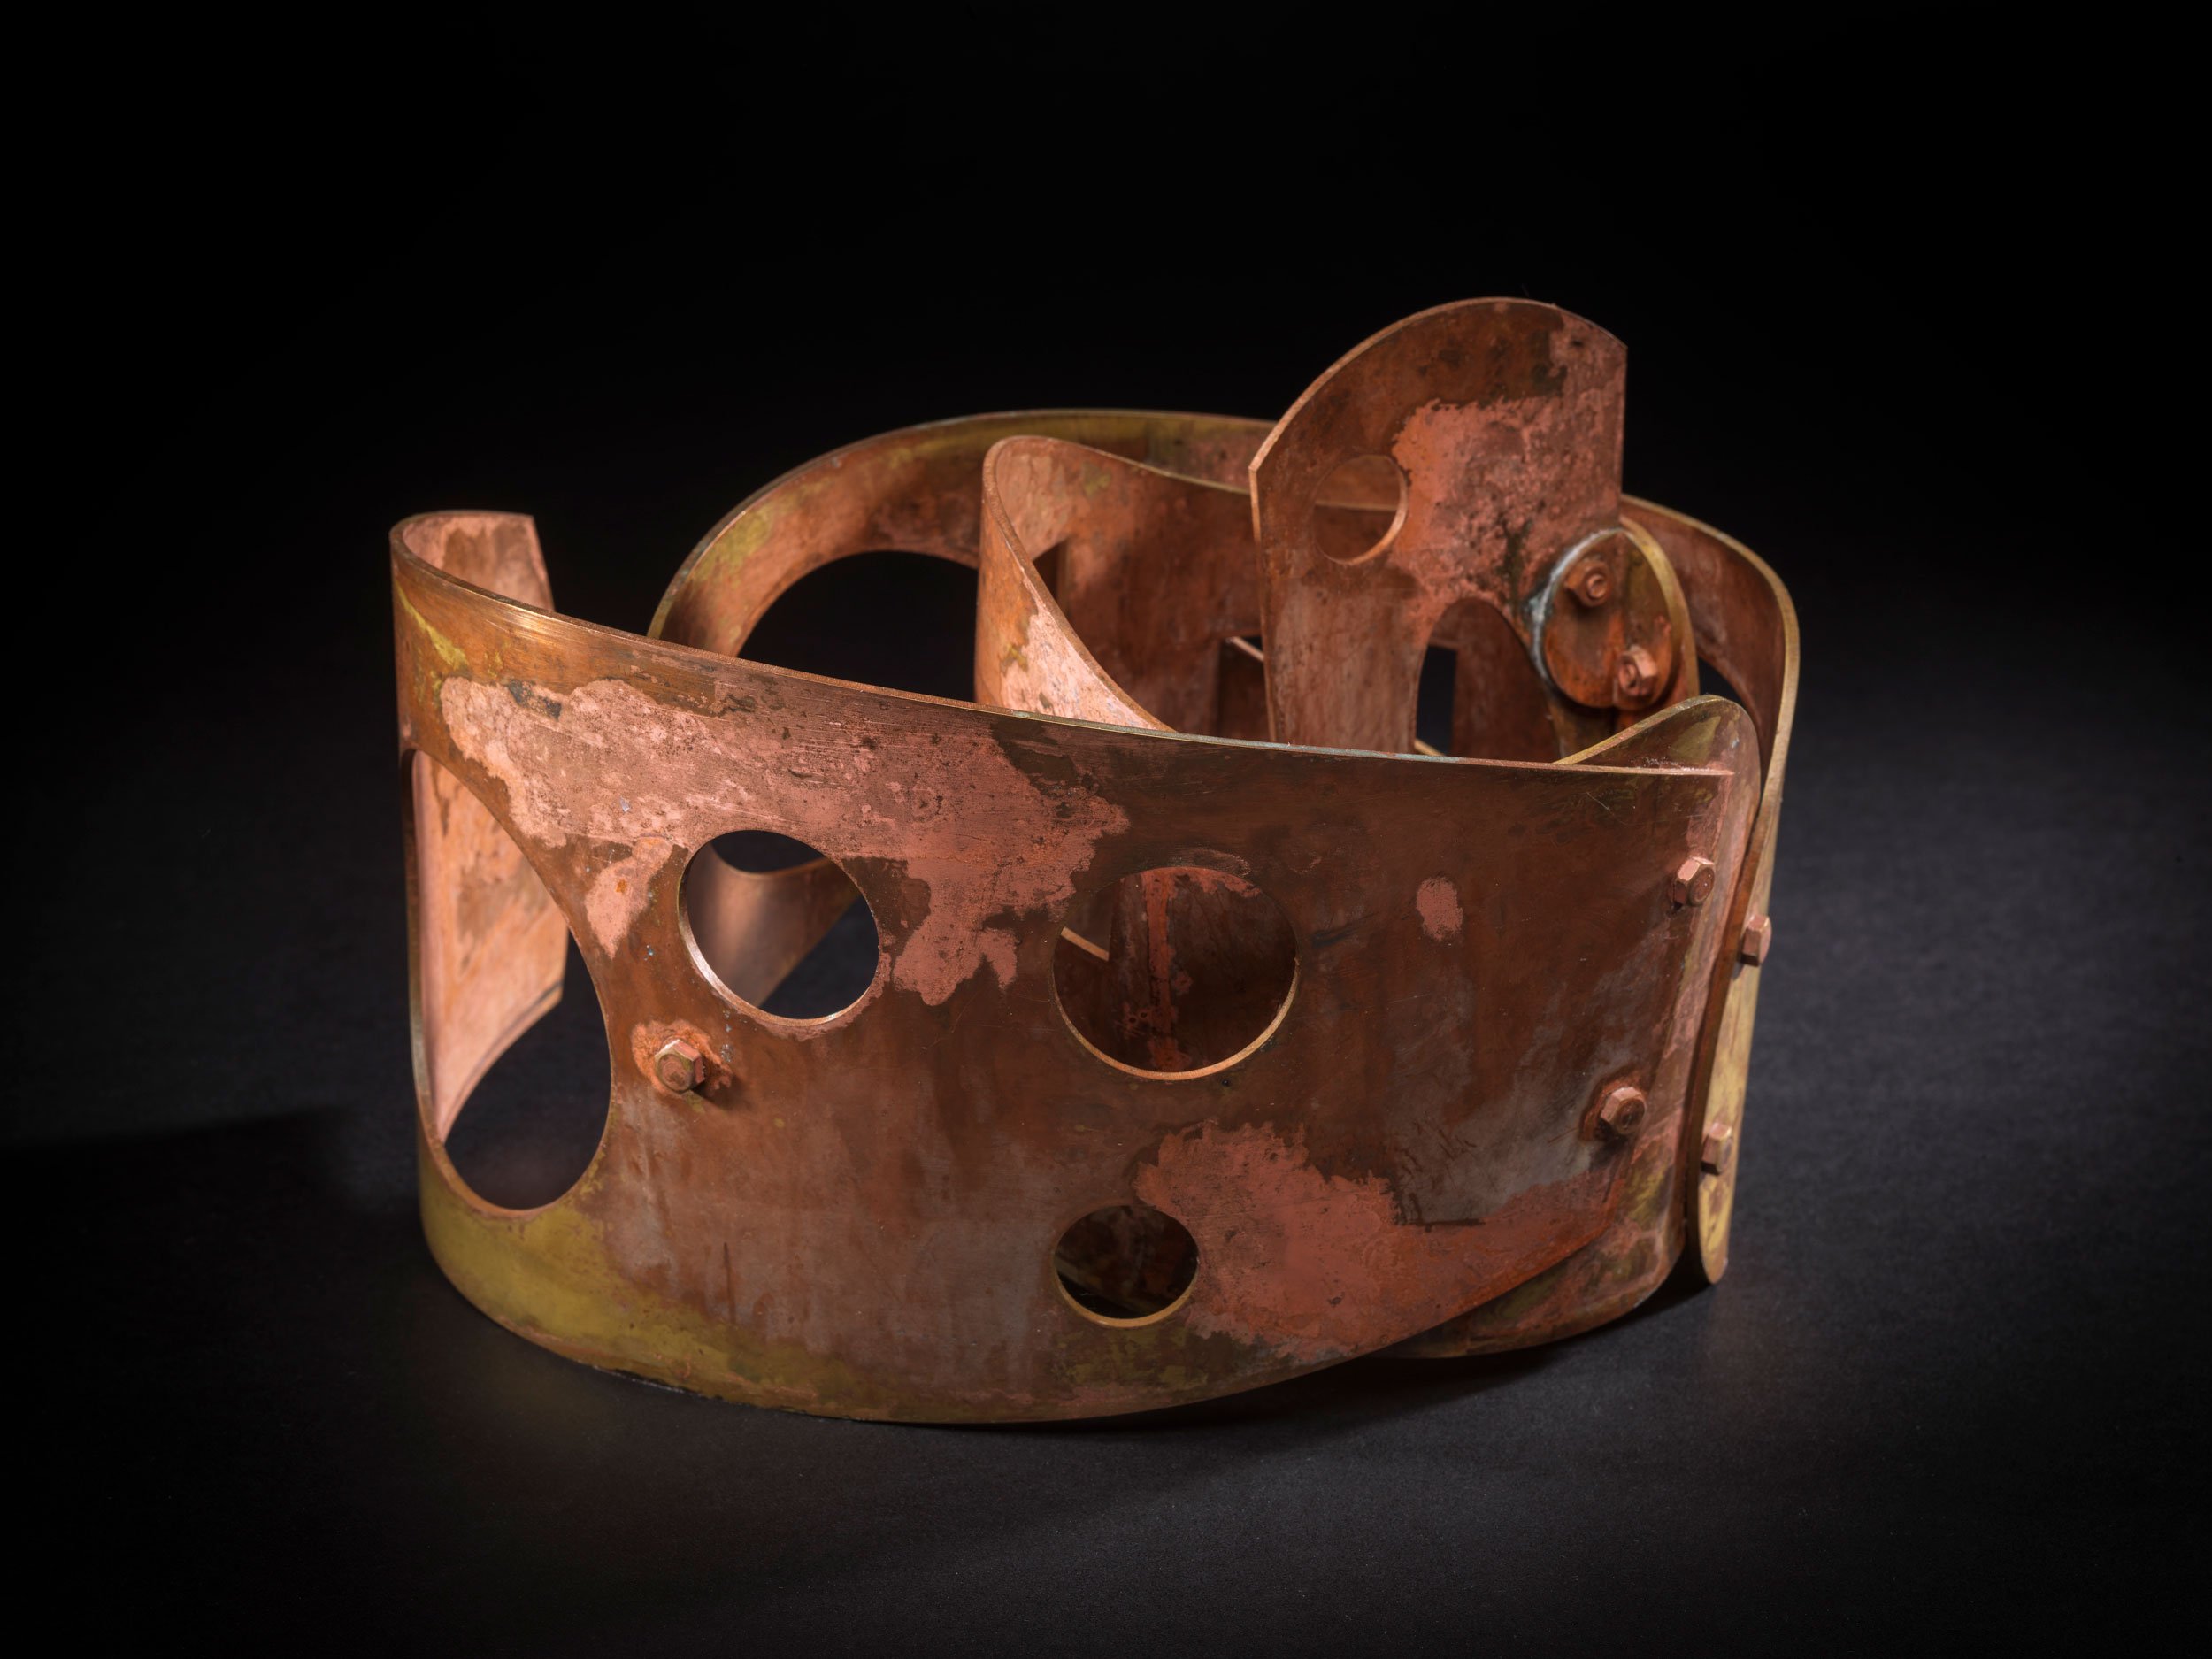 Act-of-Instance-No.-5,-2020,-patinated-brass,-22x16x17cm,-JL270820_0100.jpg